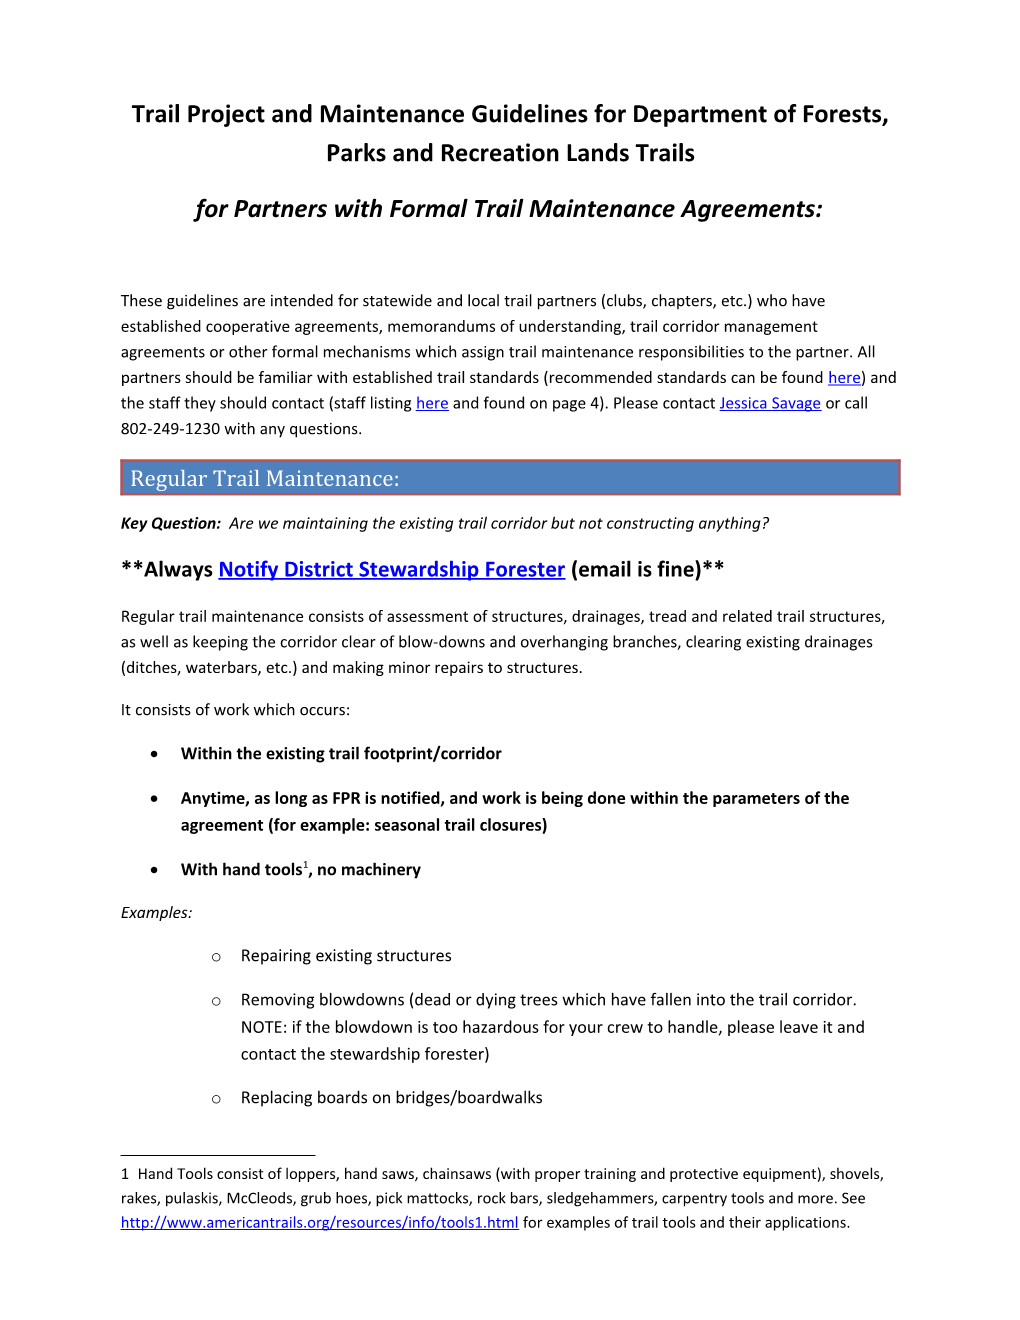 For Partners with Formal Trail Maintenance Agreements